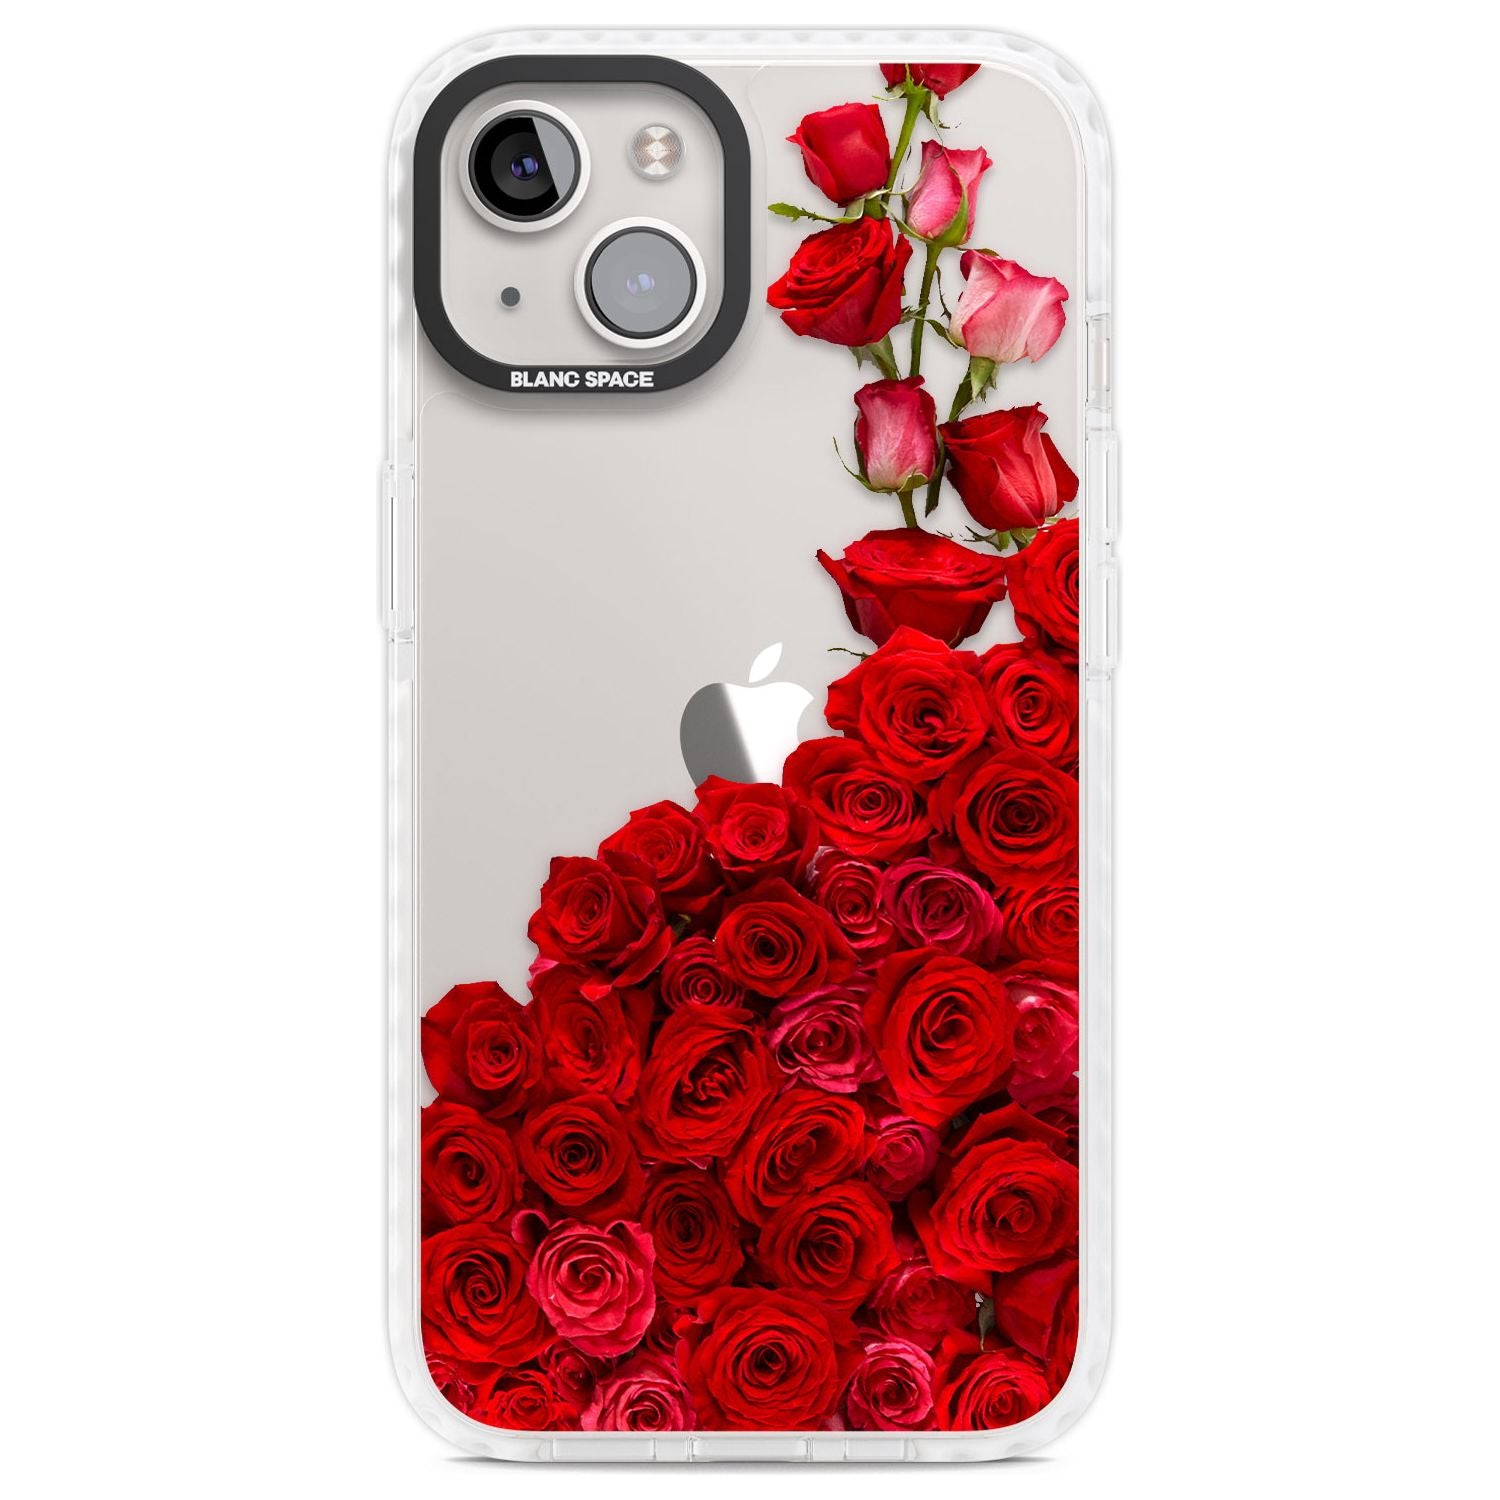 Floral Roses Phone Case iPhone 13 / Impact Case,iPhone 14 / Impact Case,iPhone 15 / Impact Case,iPhone 15 Plus / Impact Case Blanc Space